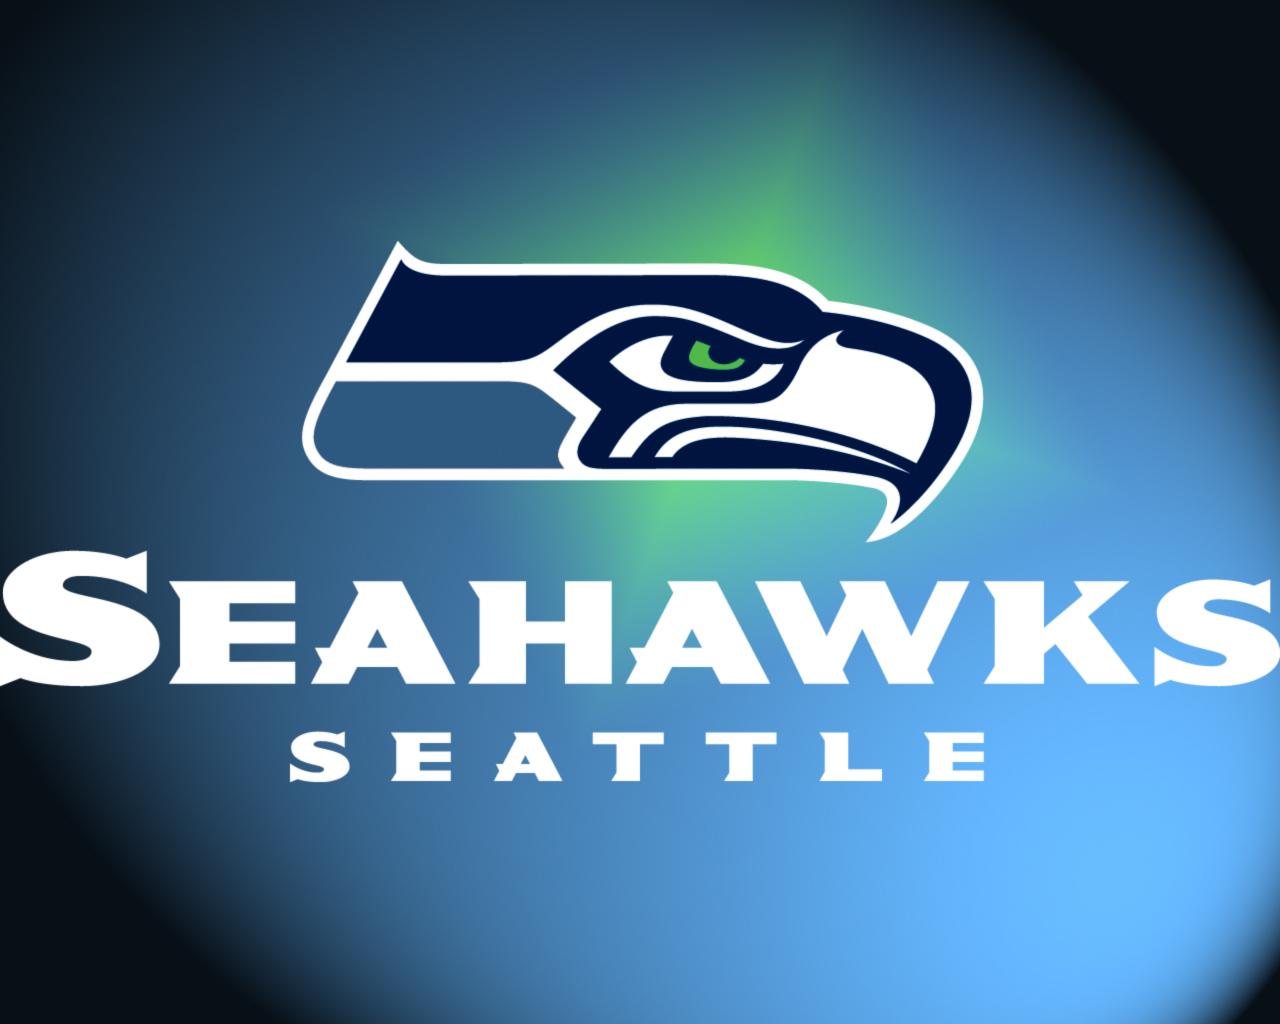 The 13th Beer – A Salute to the Seattle Seahawks